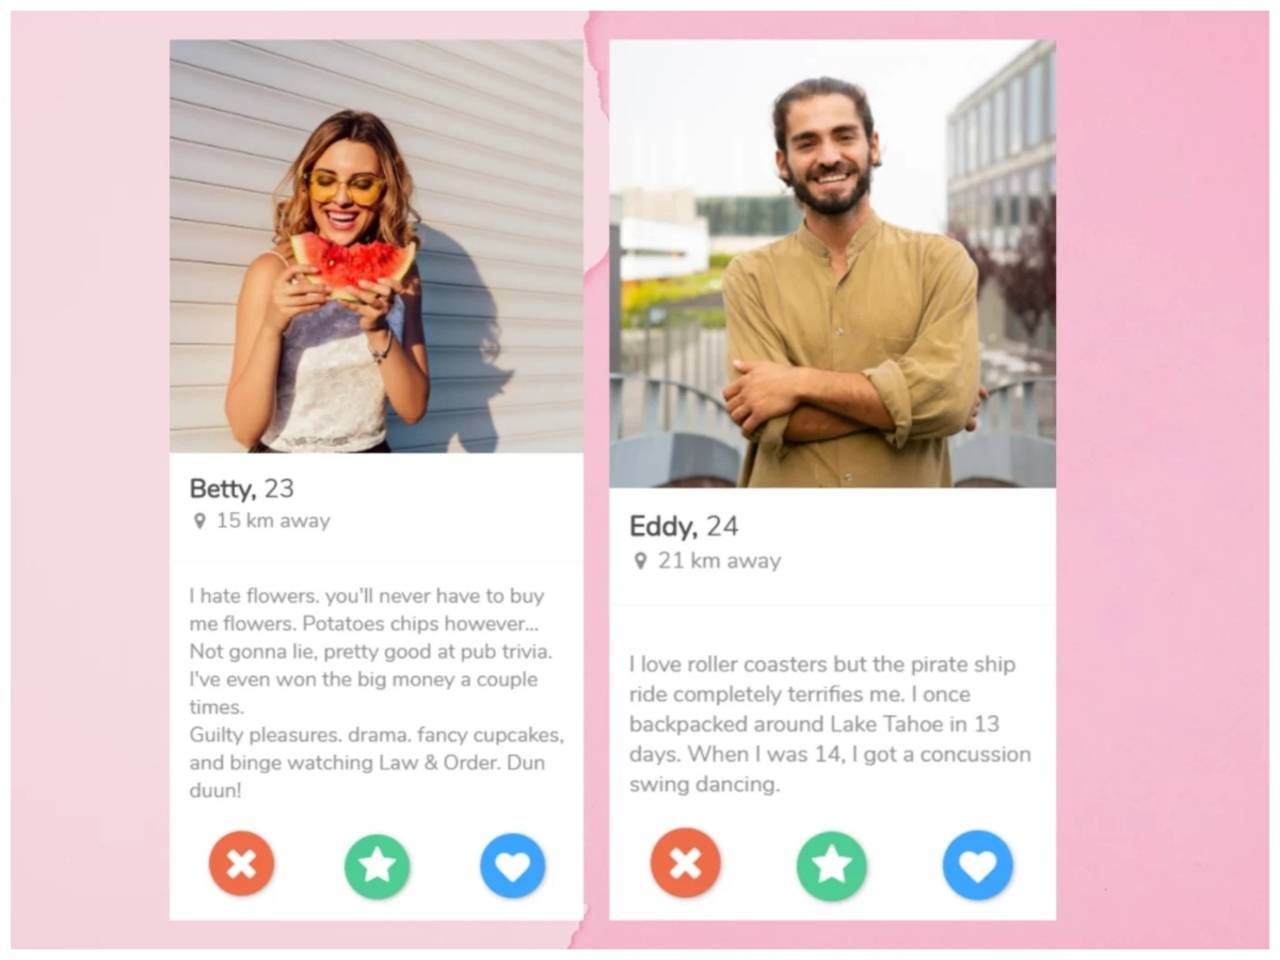 20 Best Tinder Bio Lines for Your Dating Profile, From Experts